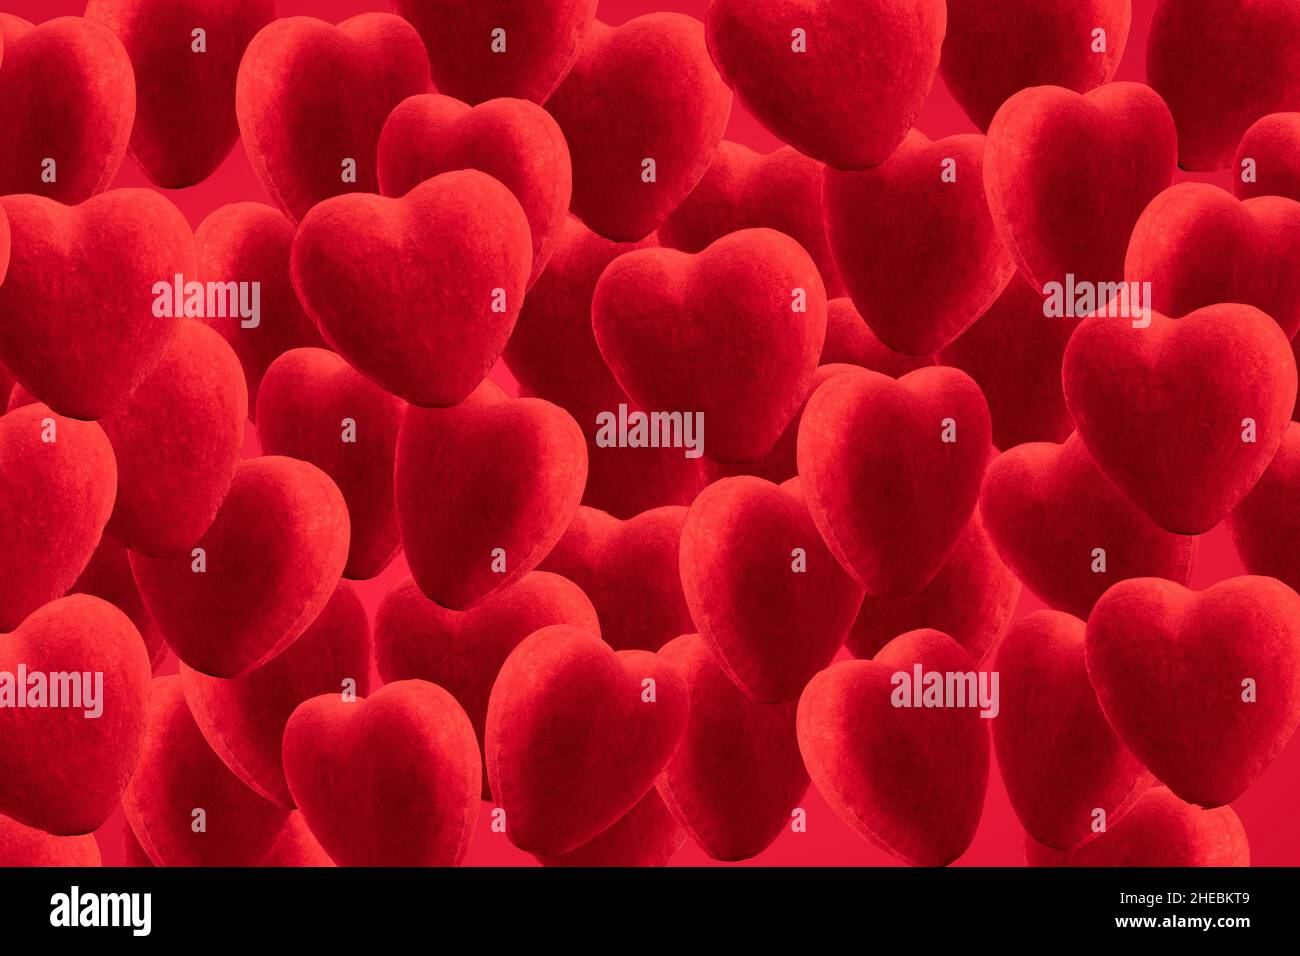 red background of plush hearts. red hearts are a symbol of happy valentine's day, love relationships and weddings. Stock Photo